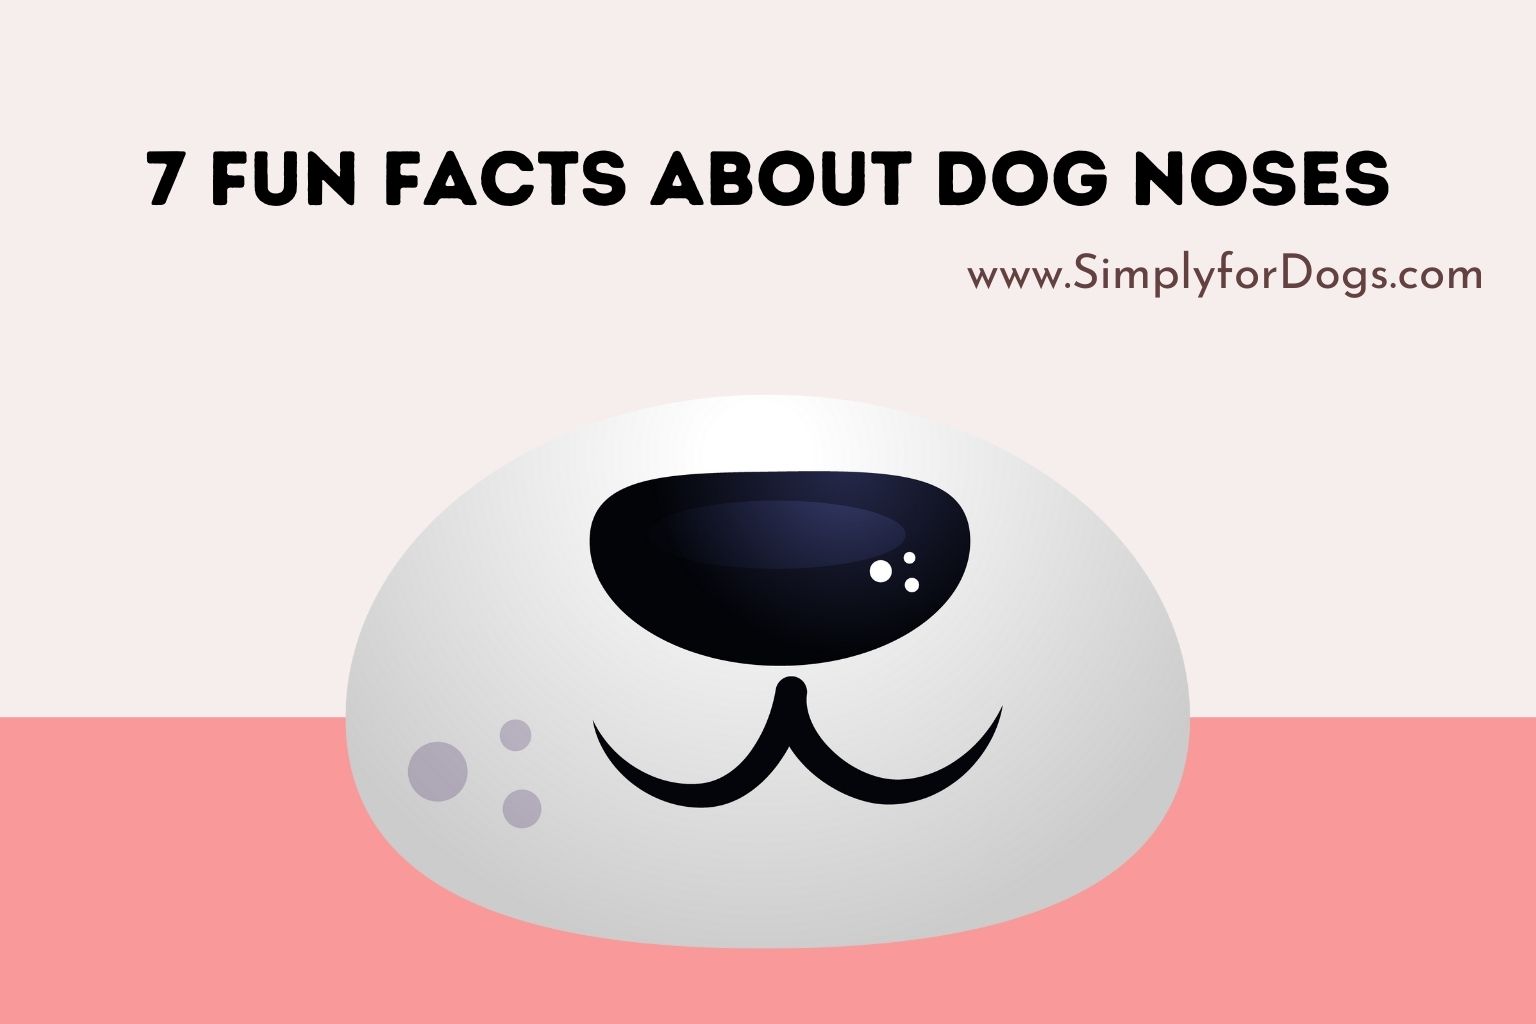 7 Fun Facts About Dog Noses